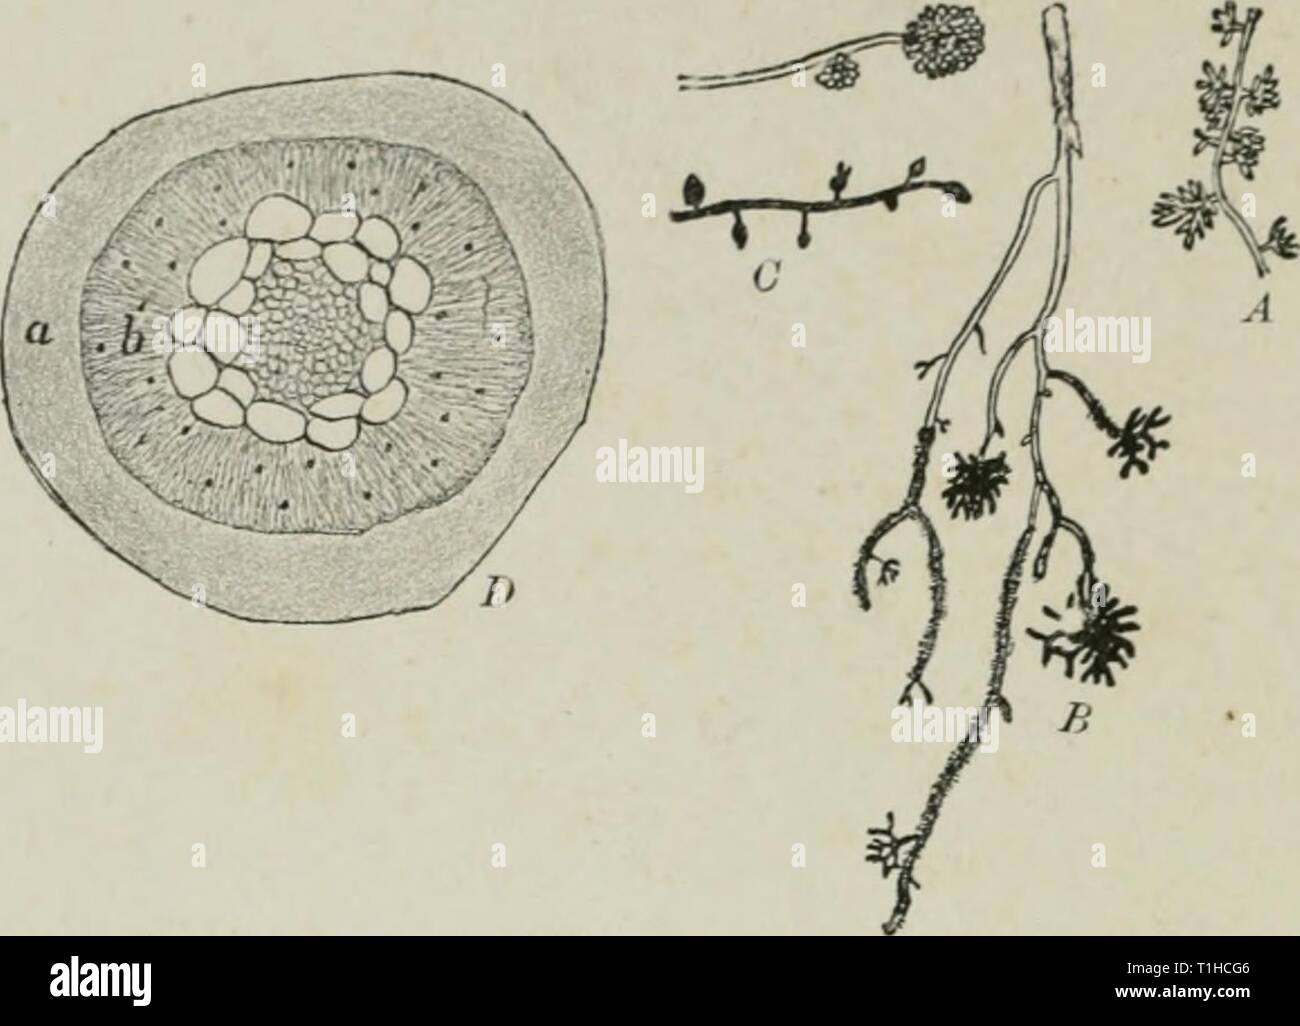 Diseases of plants induced by Diseases of plants induced by cryptogamic parasites; introduction to the study of pathogenic Fungi, slime-Fungi, bacteria, & Algae  diseasesofplant00tube Year: 1897  96 SYMBIOSIS. in Monotnqm. The root-system of a tree has not only to secure nourishment, hut also the rigidity and stability of the tree. This latter can only be attained by a wide distribution of roots in the firm subsoil free from humus, where normal roots with root-hairs will be formed. The nursing function of the mycorhiza seems thus to be less important than in the case of Monotnipa.    Fig. la.— Stock Photo